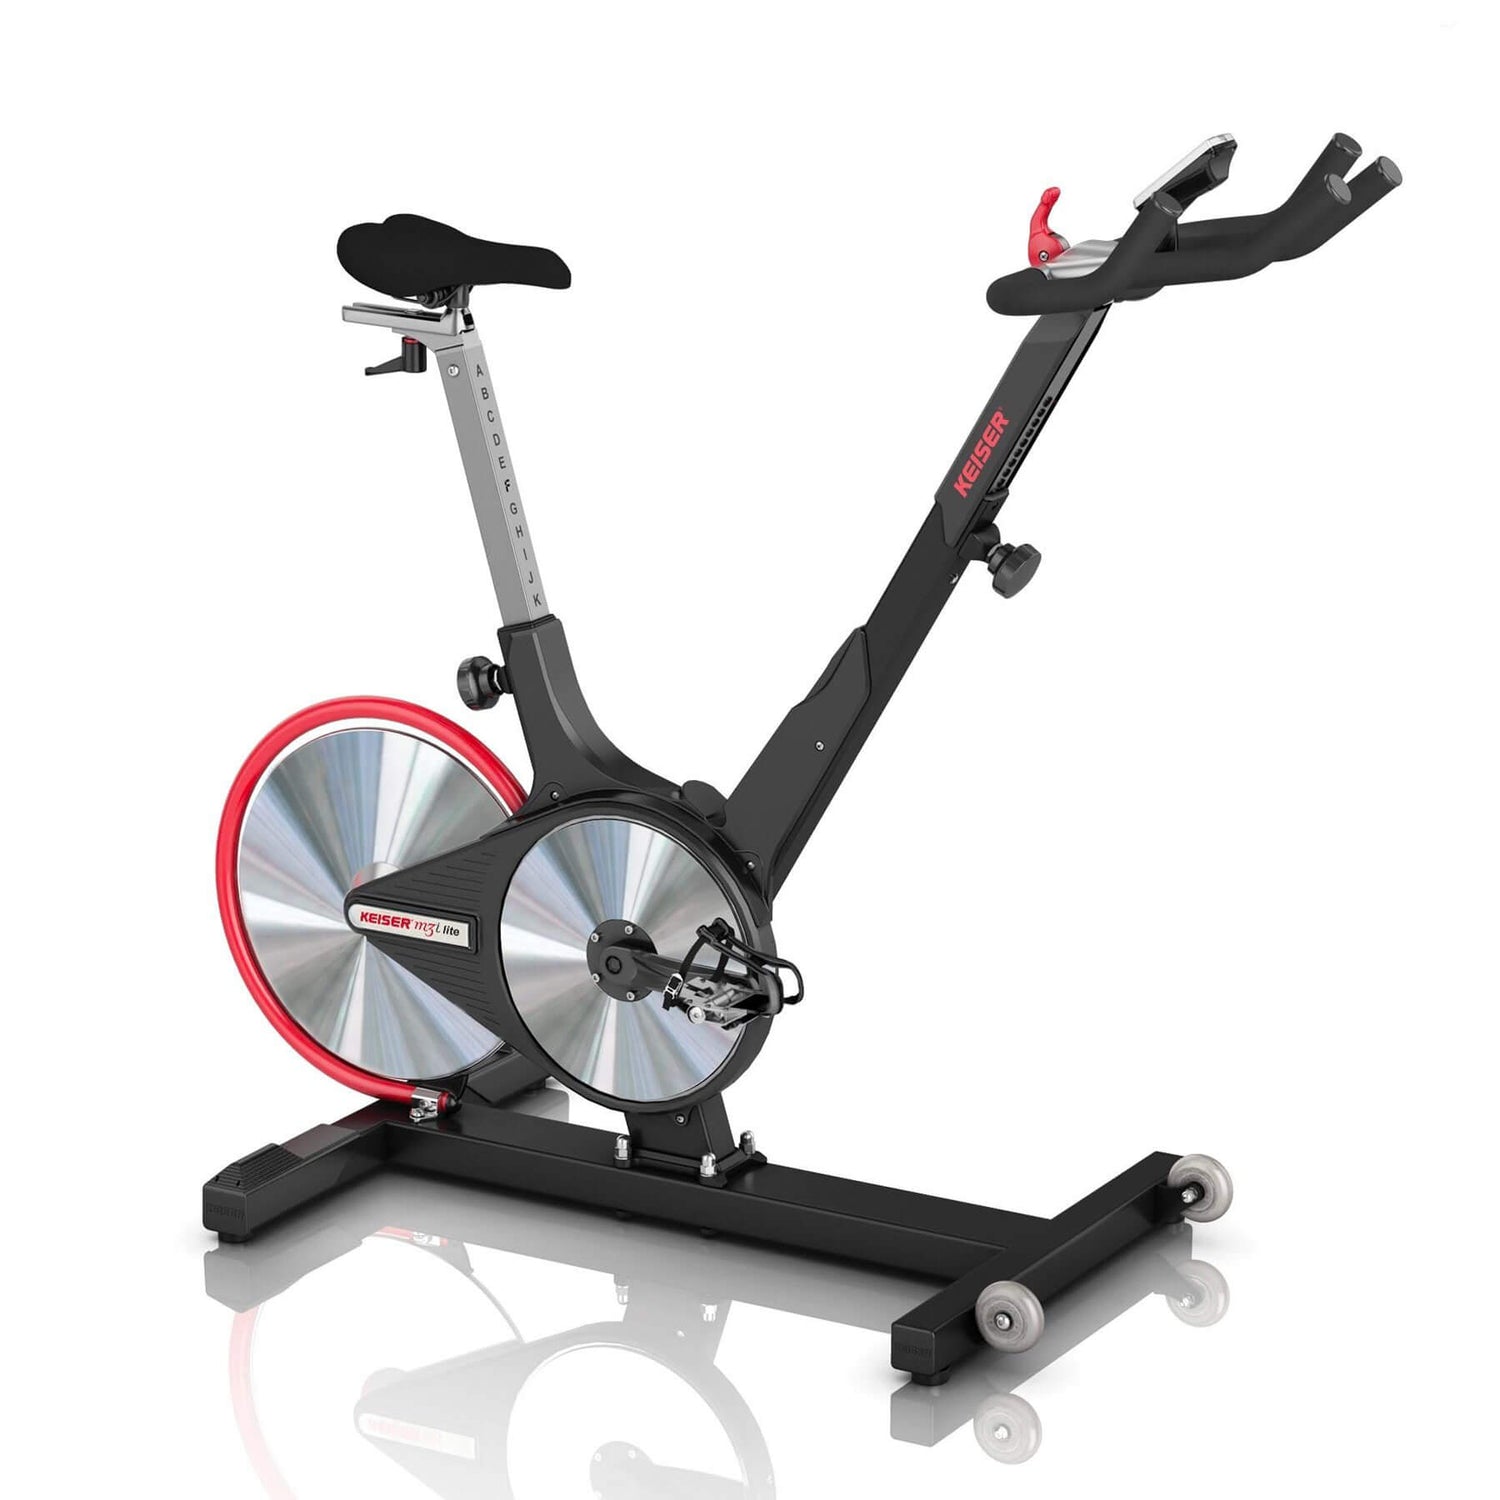 a keiser m3i lite spin bike complete with all components